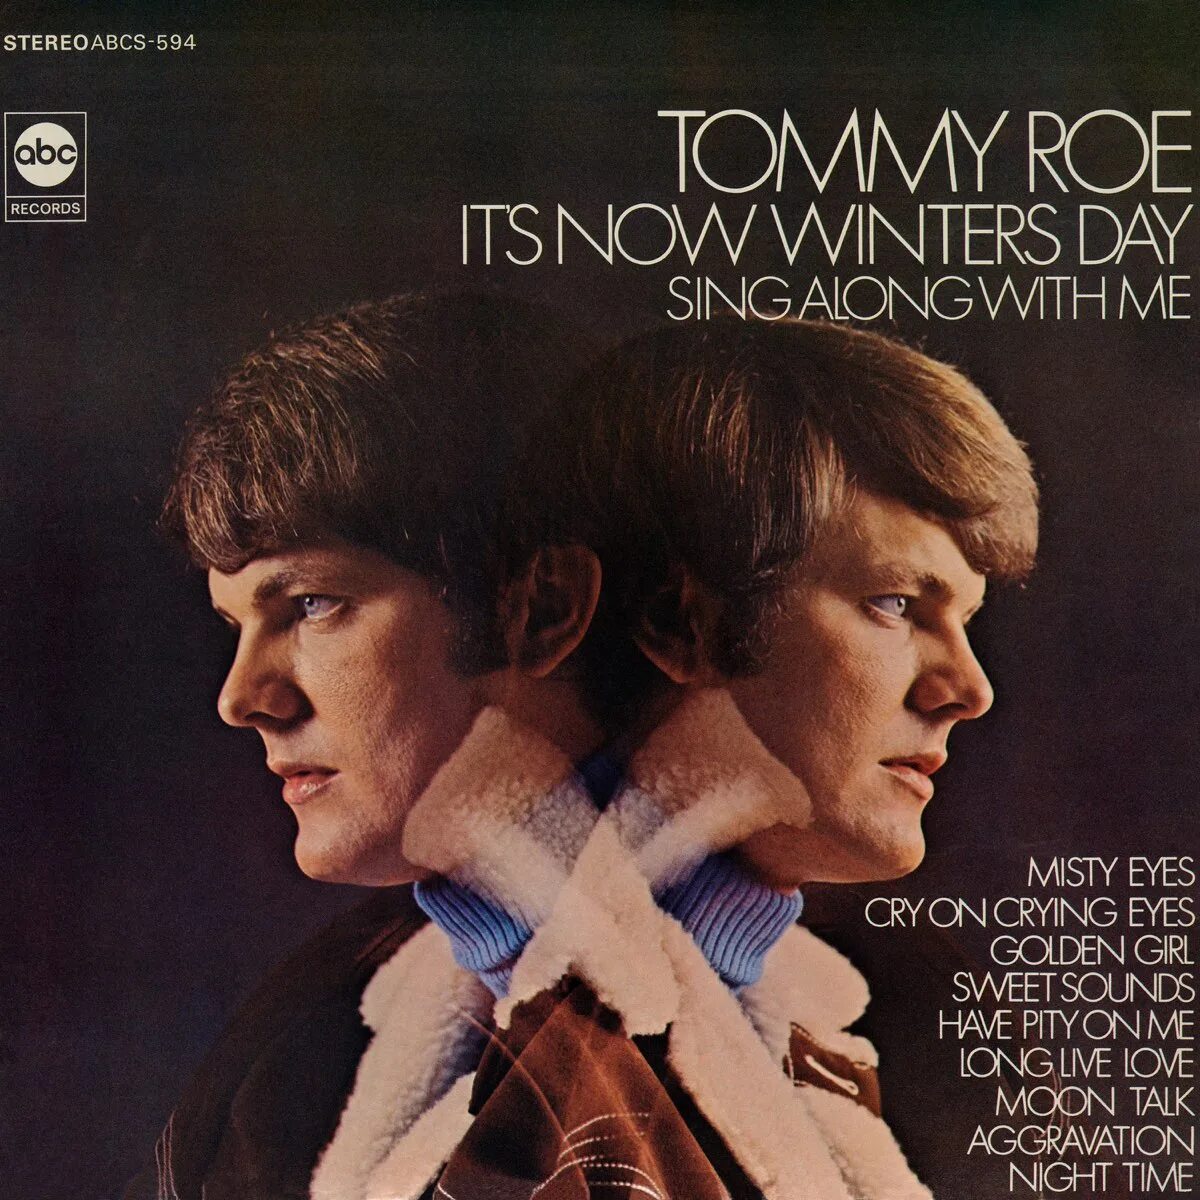 Roe песня. Tommy Roe. Tommy Roe it's Now Winter's Day. Tommy Roe albums.